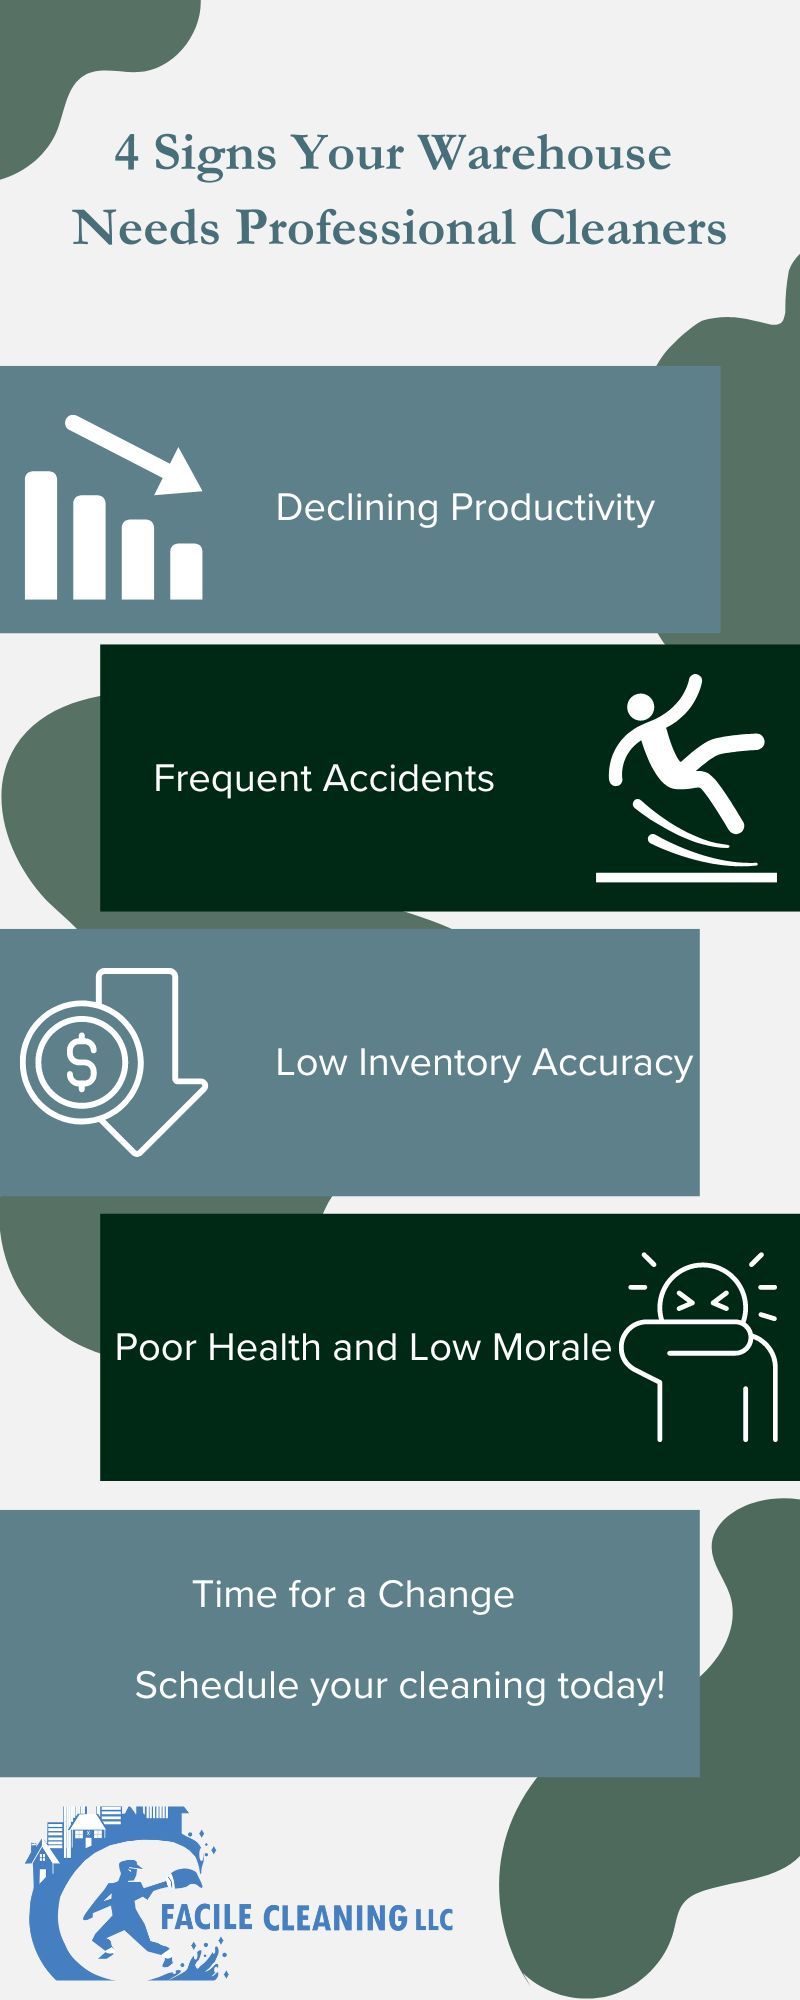 M38396 - Infographic- 4 Signs Your Warehouse Needs Professional Cleaners.jpg